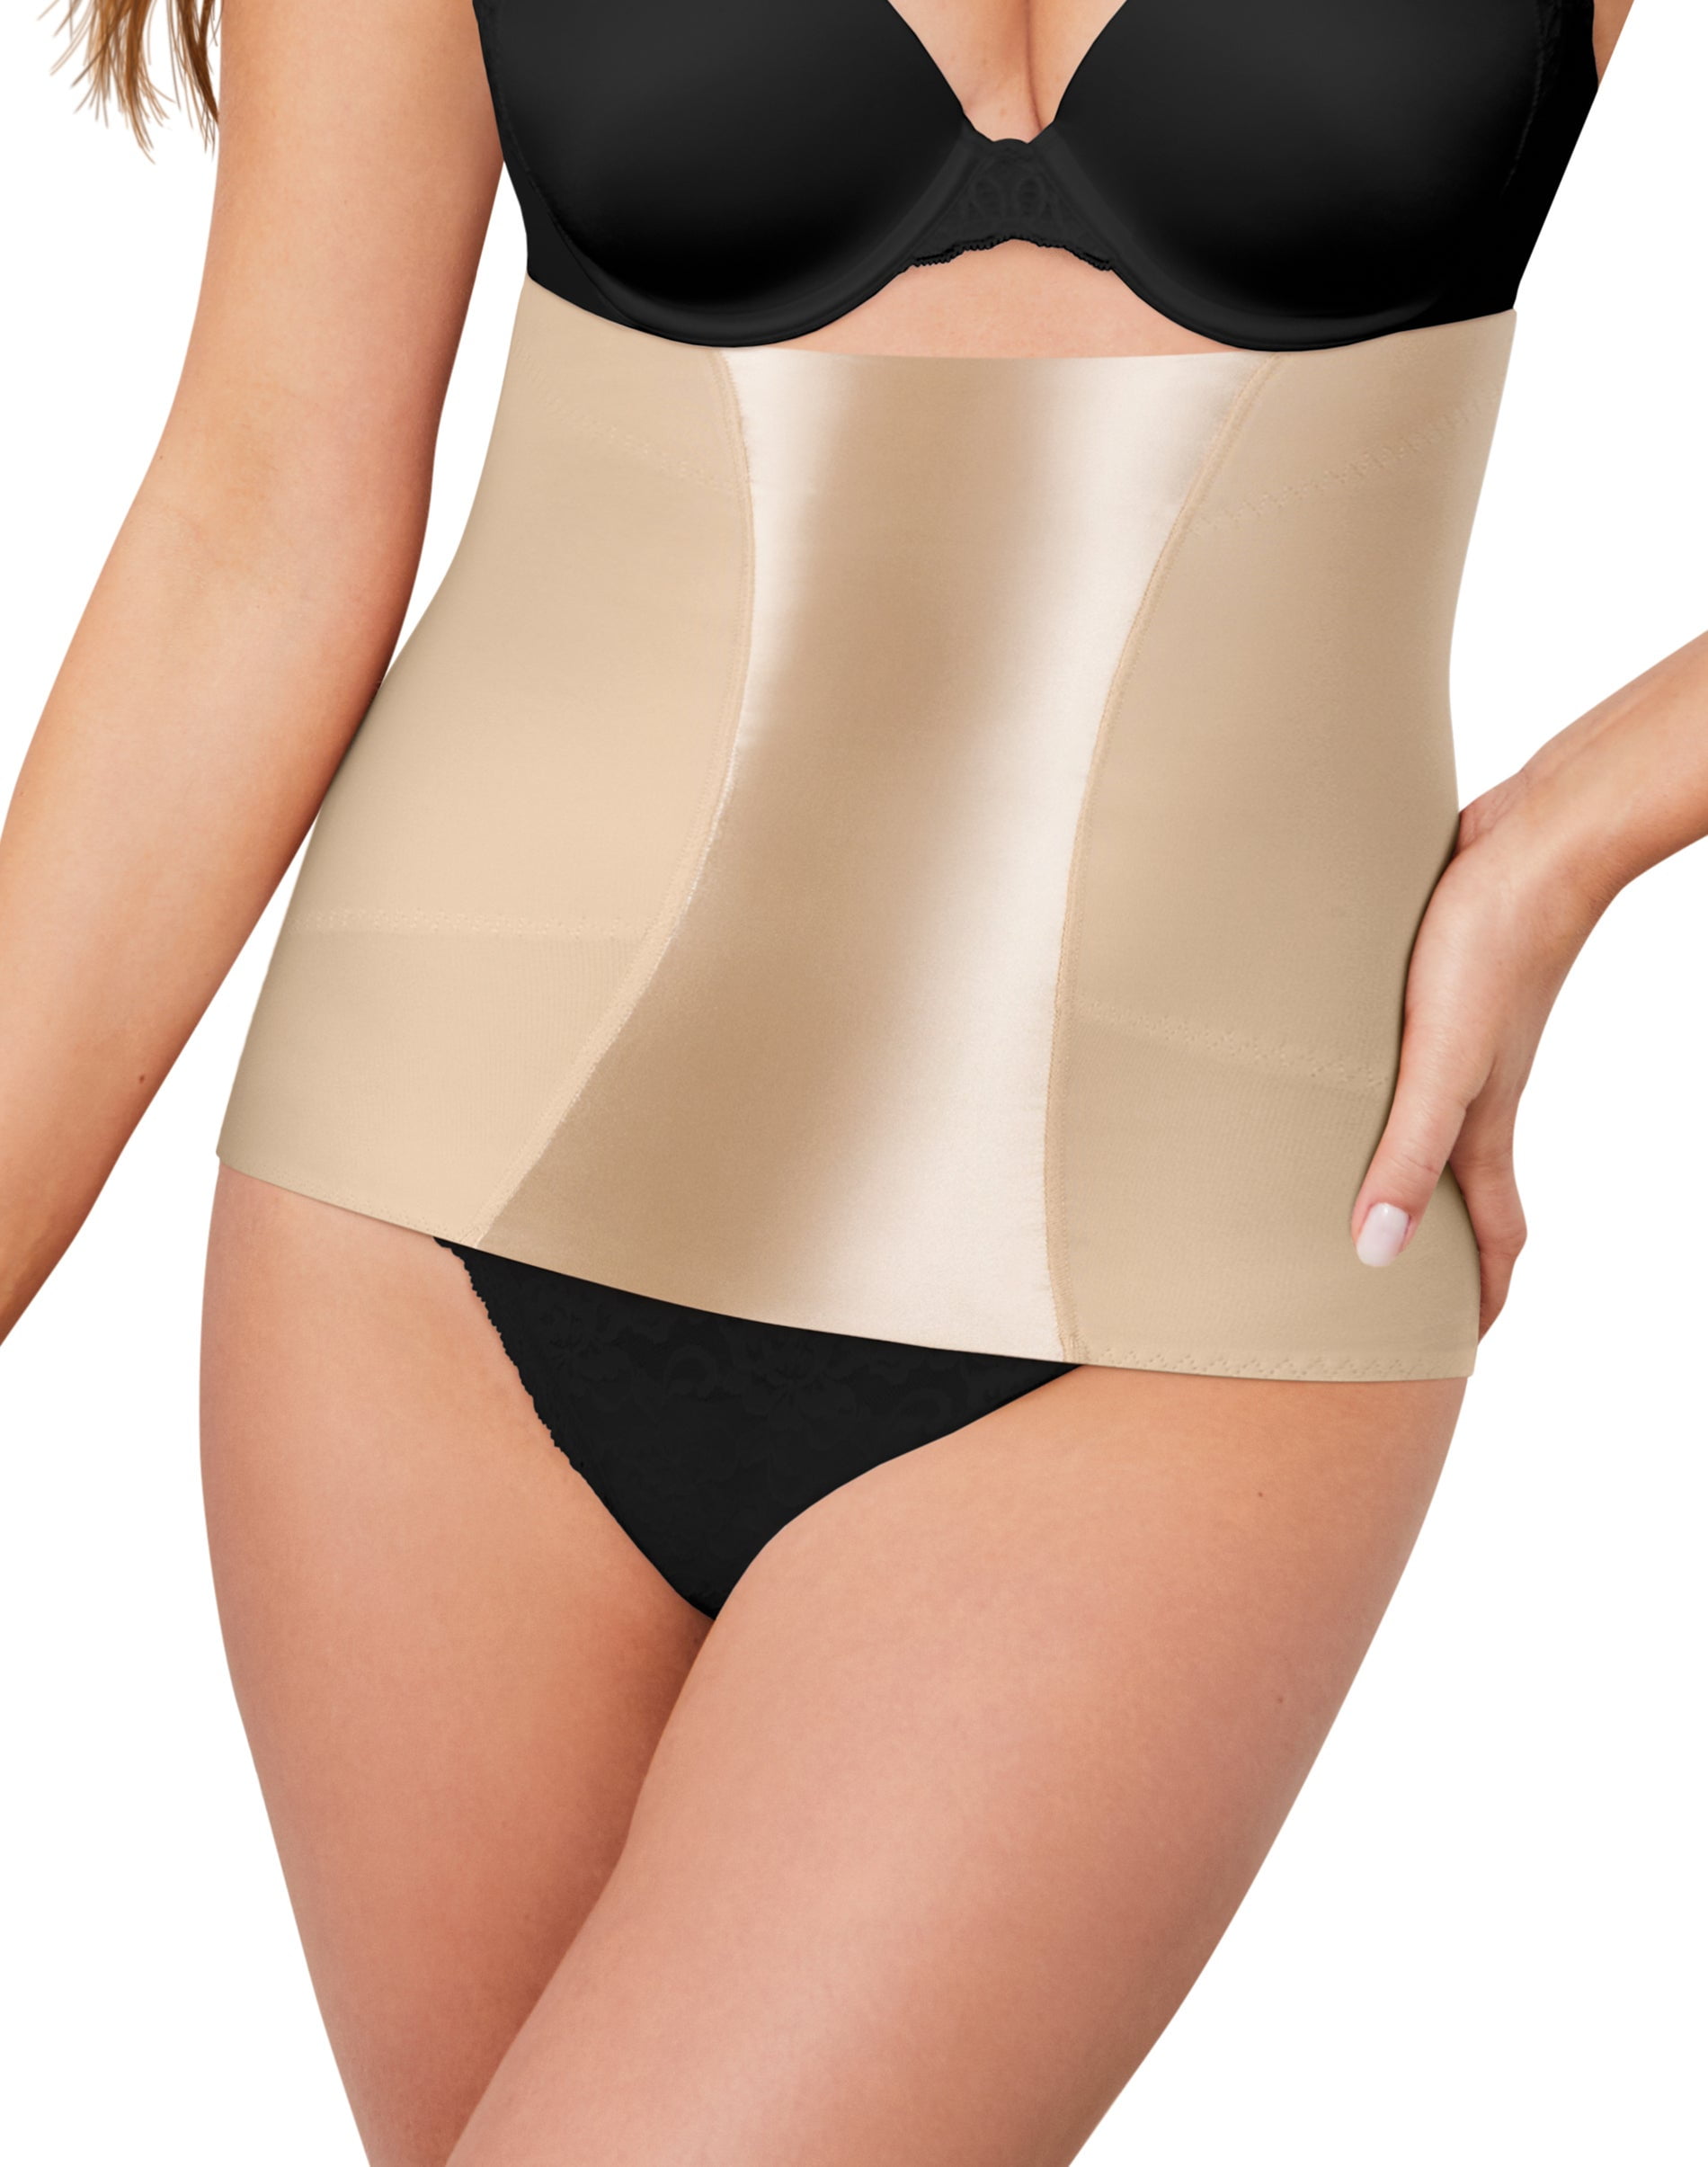 Anti-Cellulite Waist Trainer FREE SHIPPING 